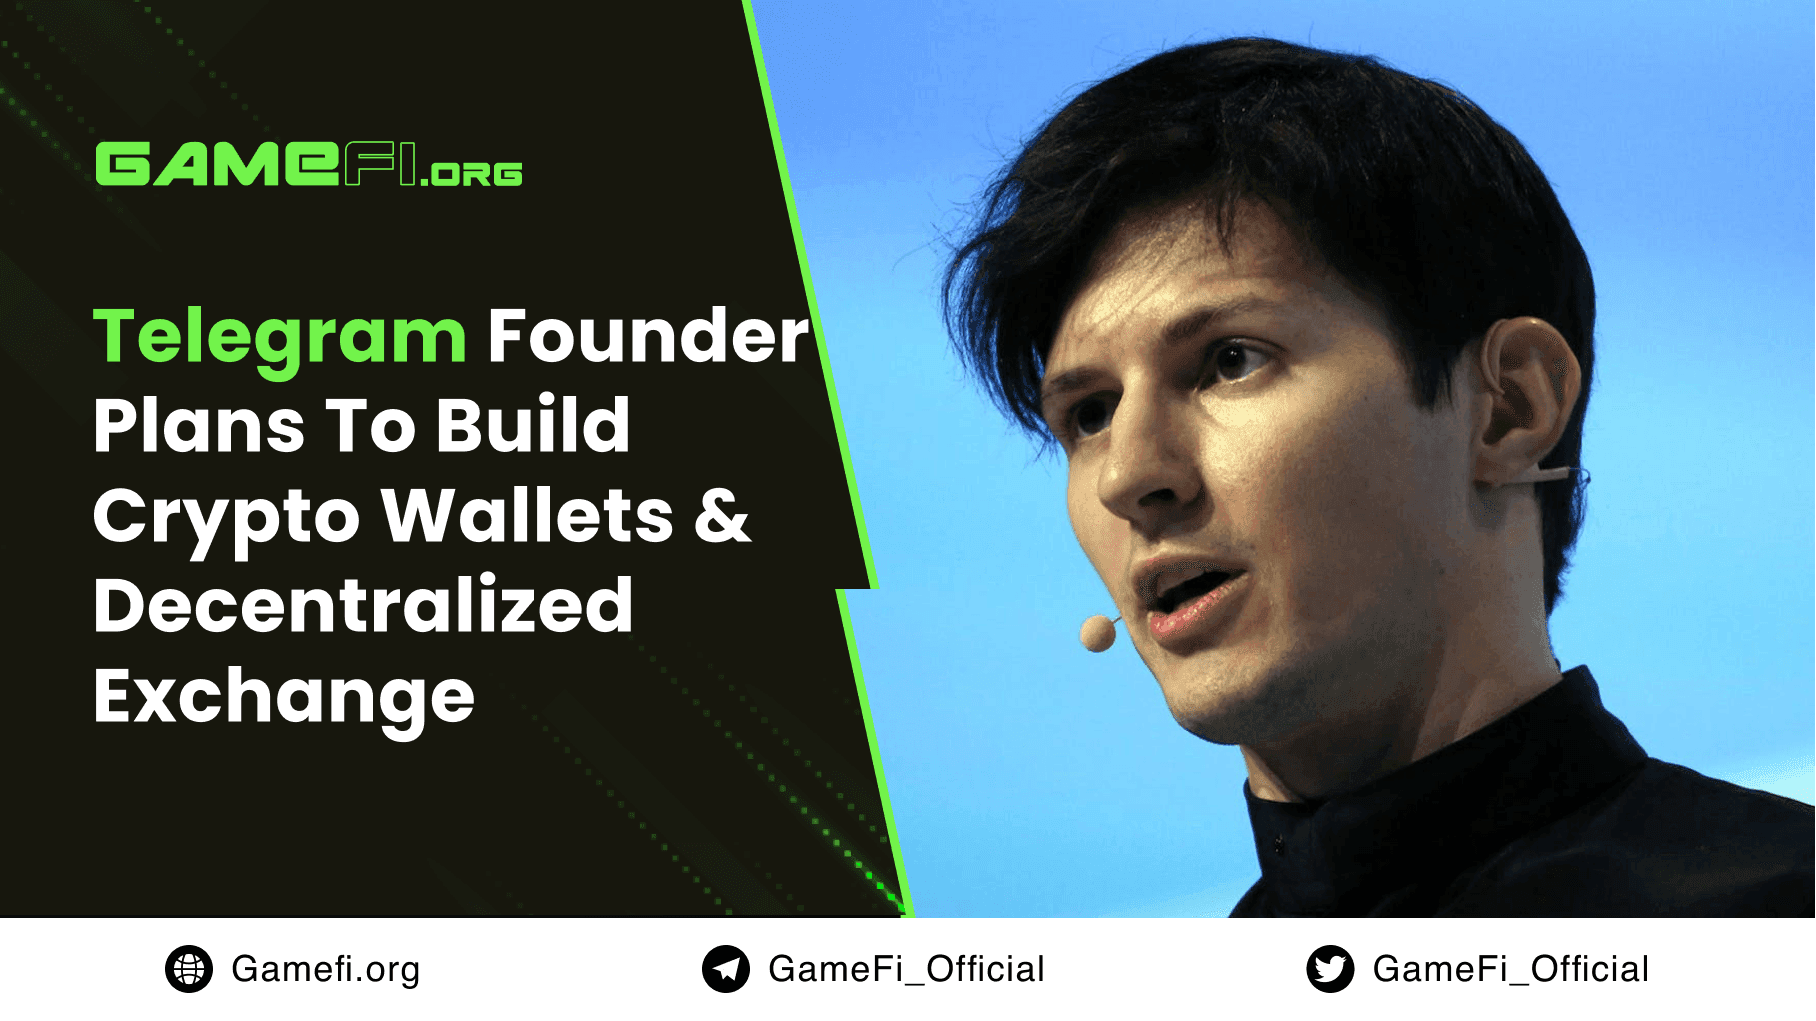 Telegram Founder Wants to Build Crypto Wallets and Decentralized Exchange